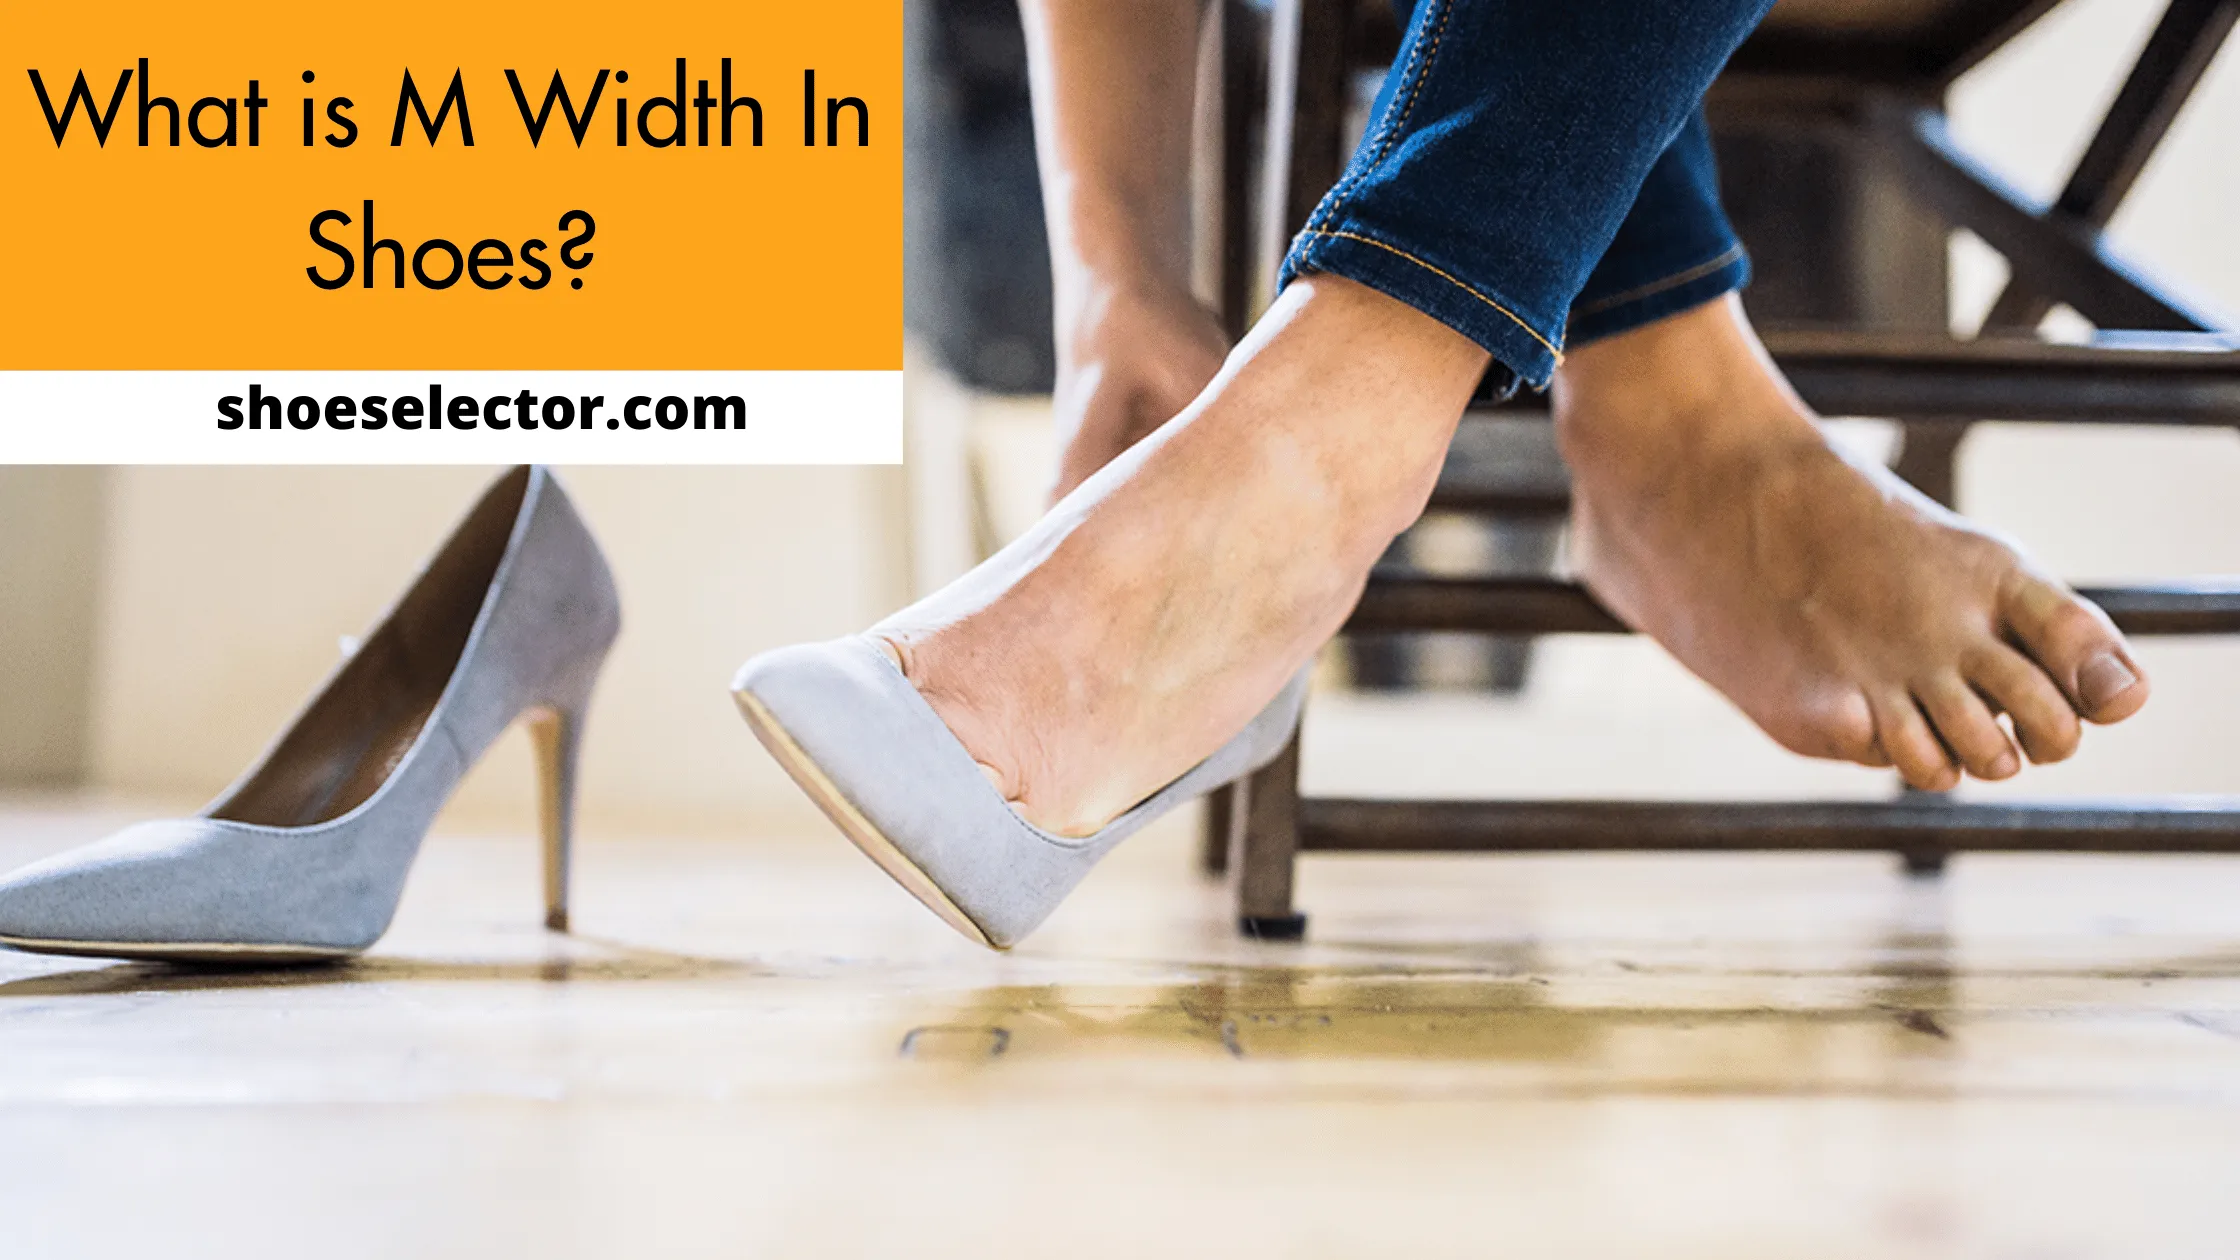 What is M Width In Shoes? - Comprehensive Guide